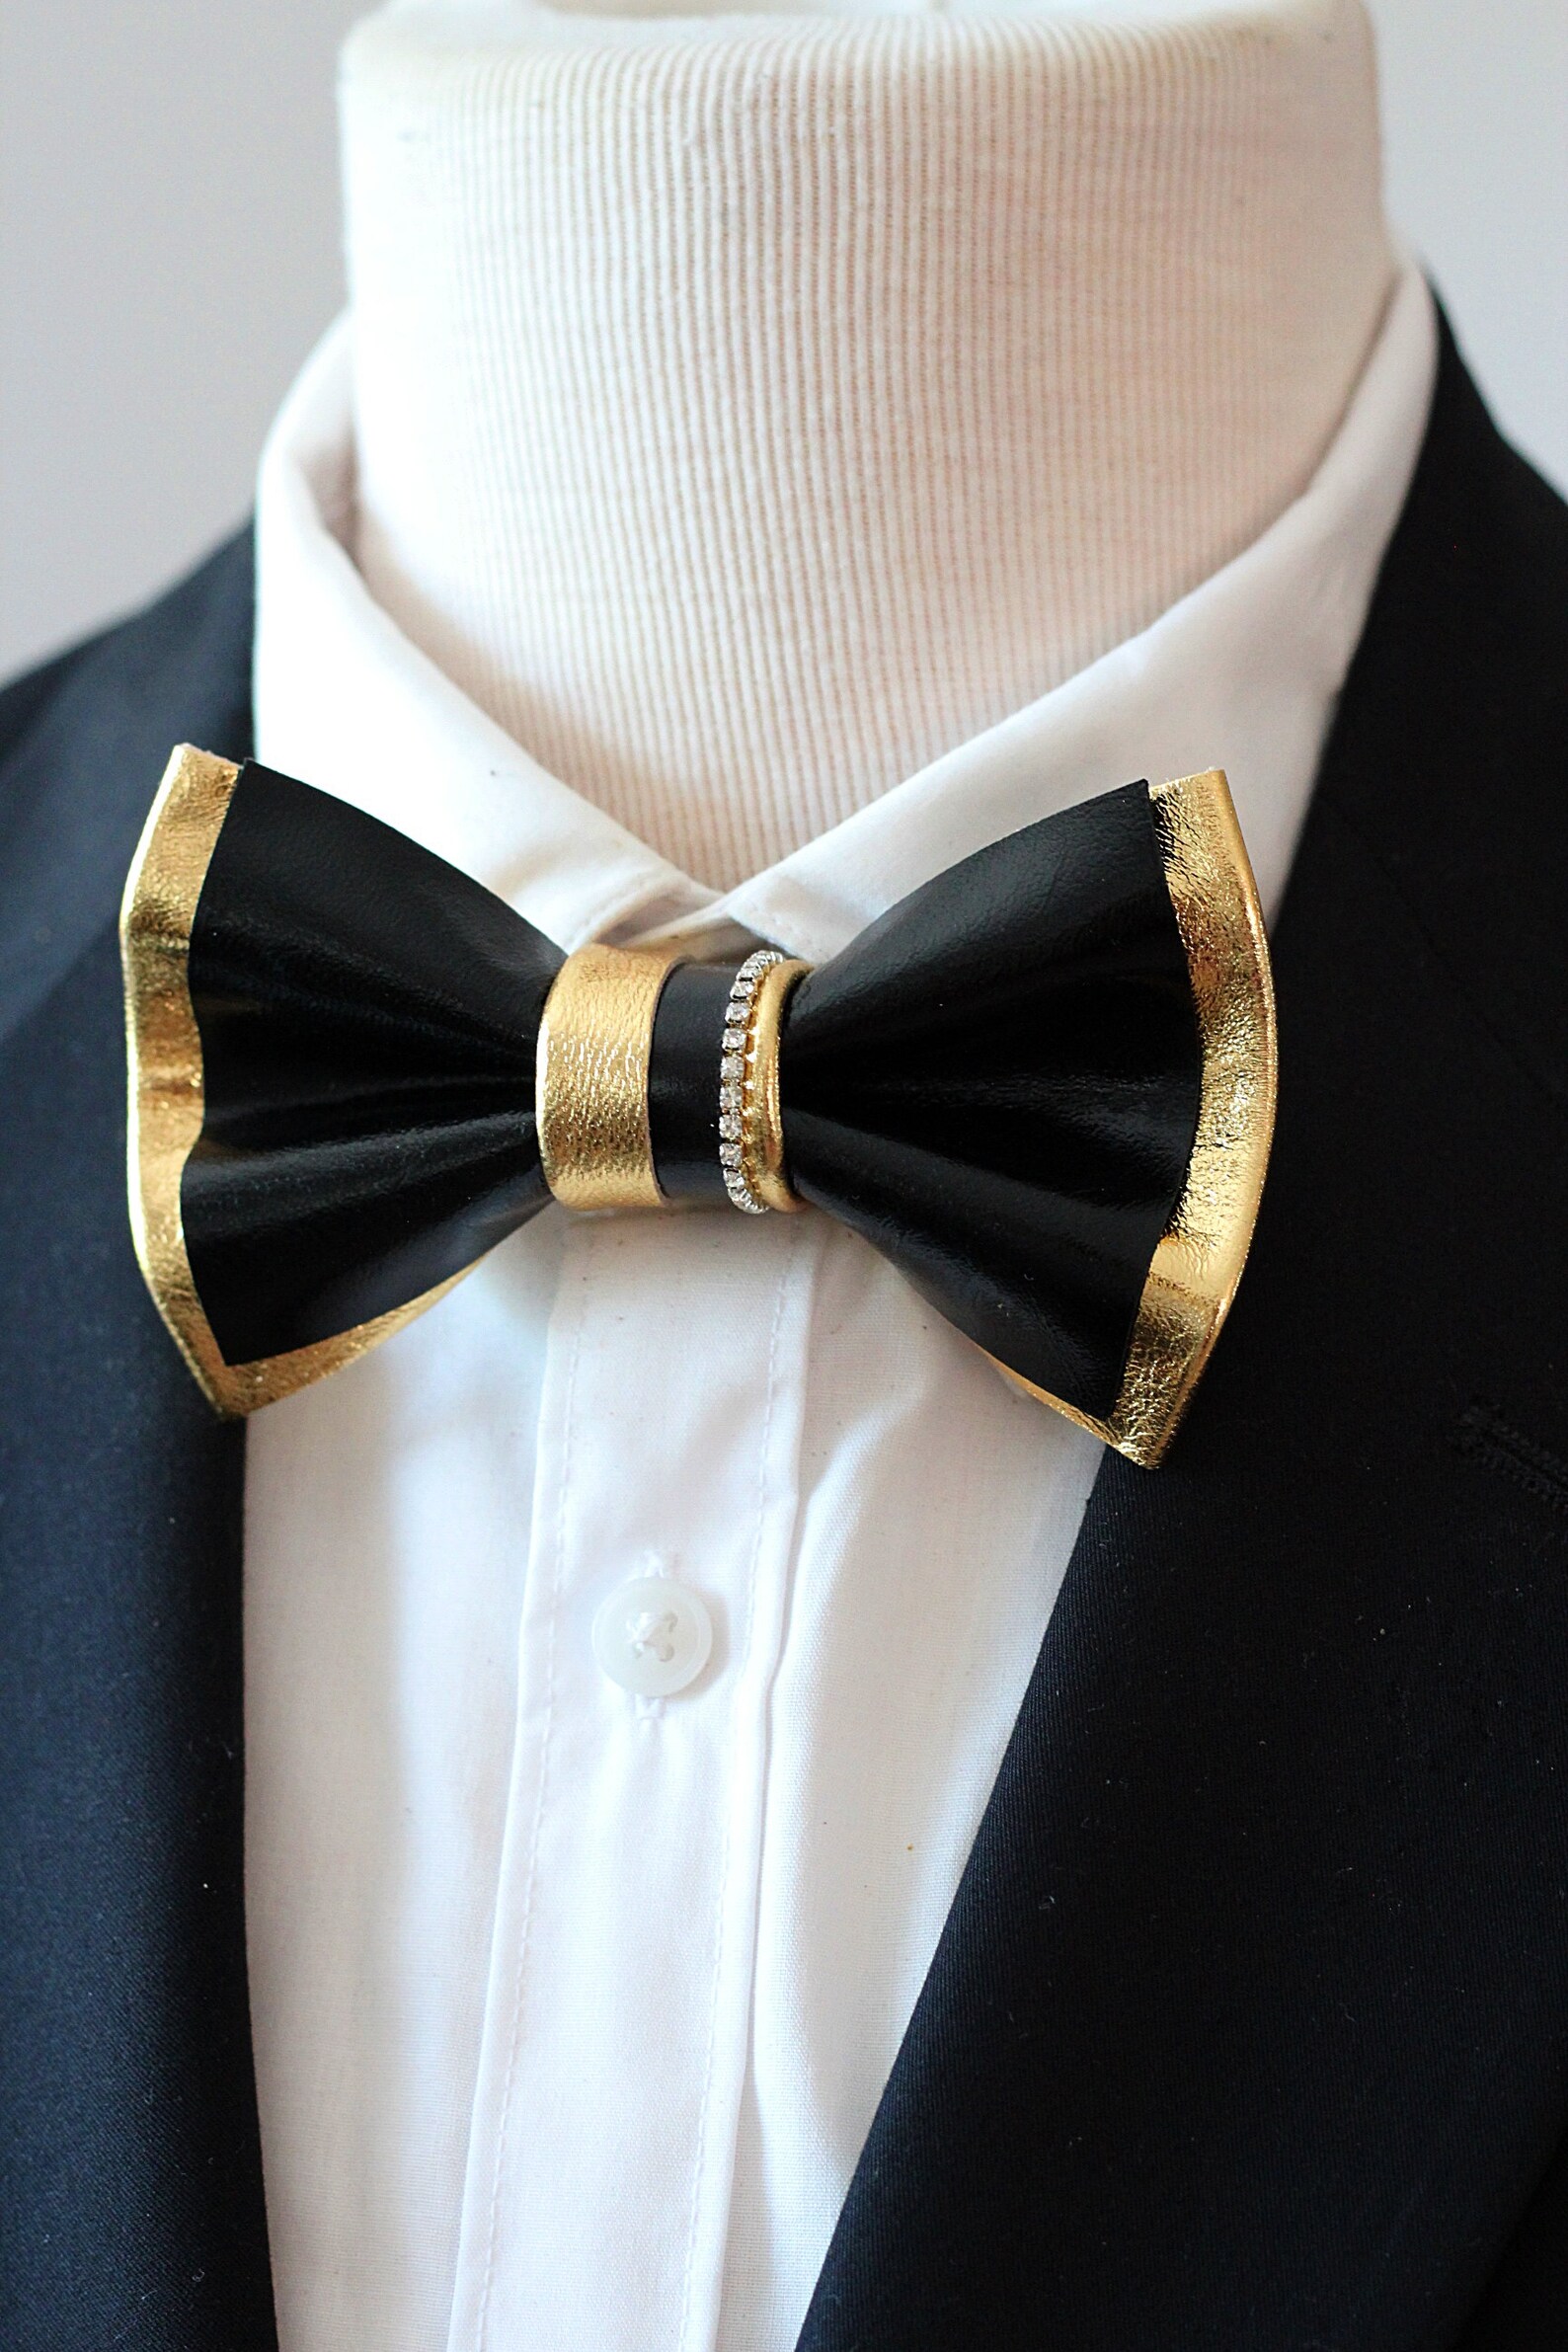 Black and Gold Mens Custom Bow Tie for Men Wedding Bow Tie - Etsy